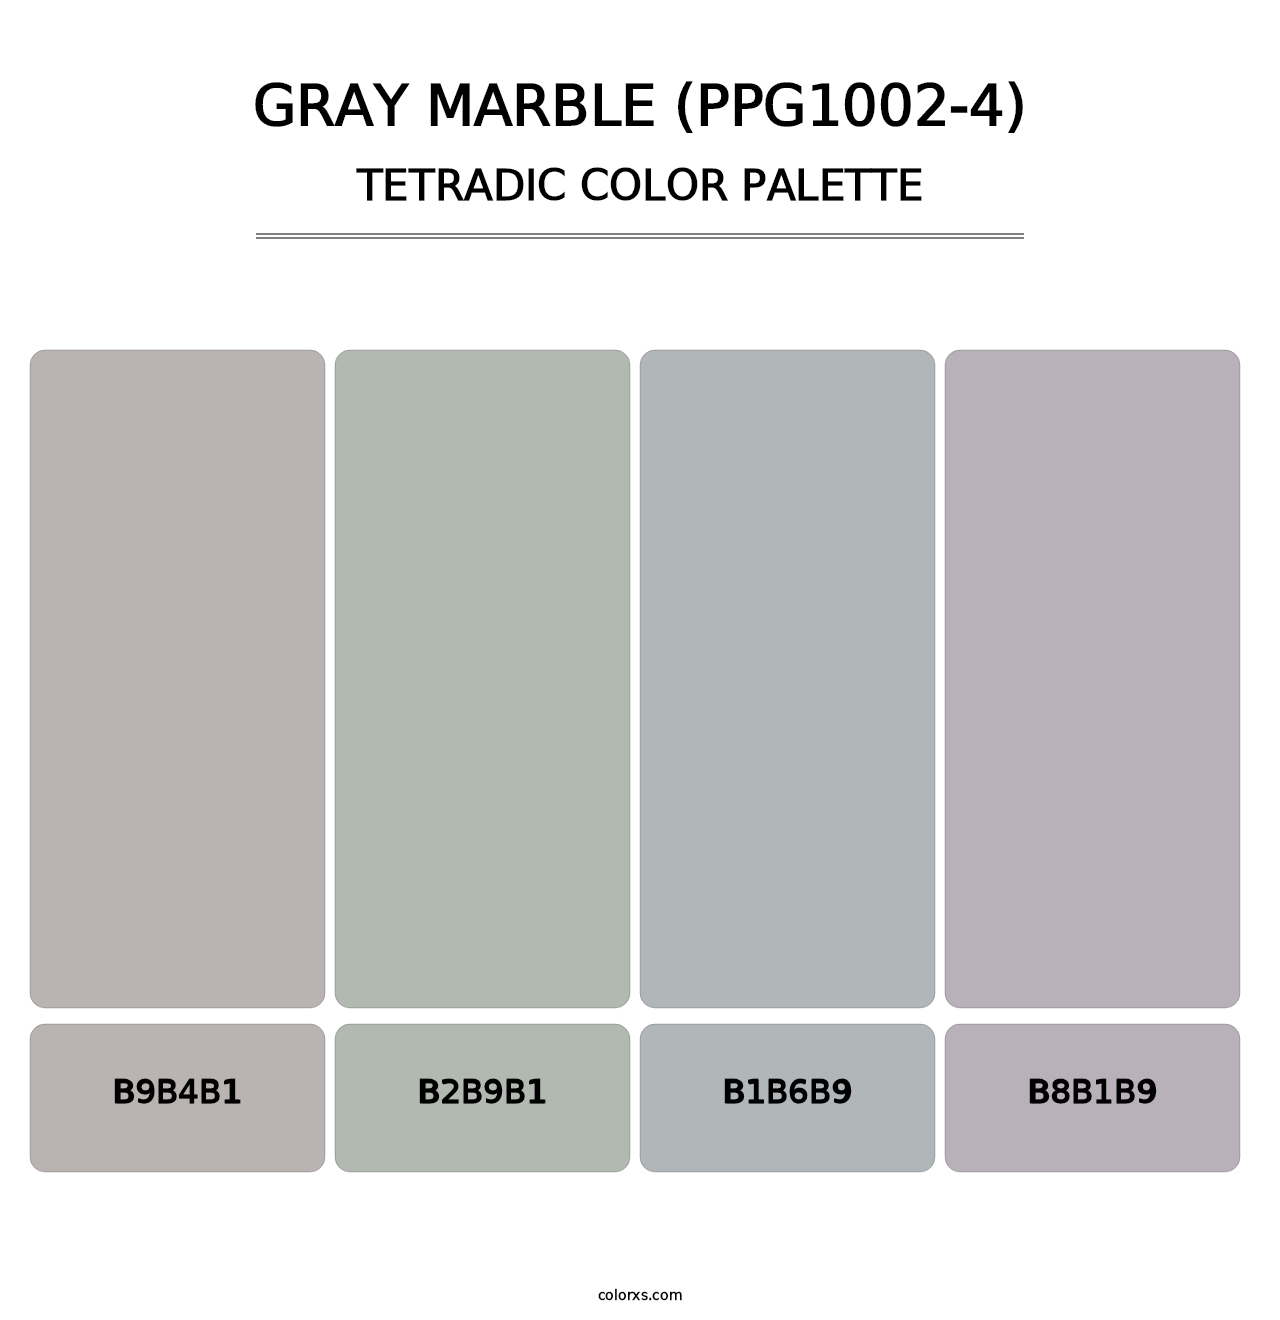 Gray Marble (PPG1002-4) - Tetradic Color Palette